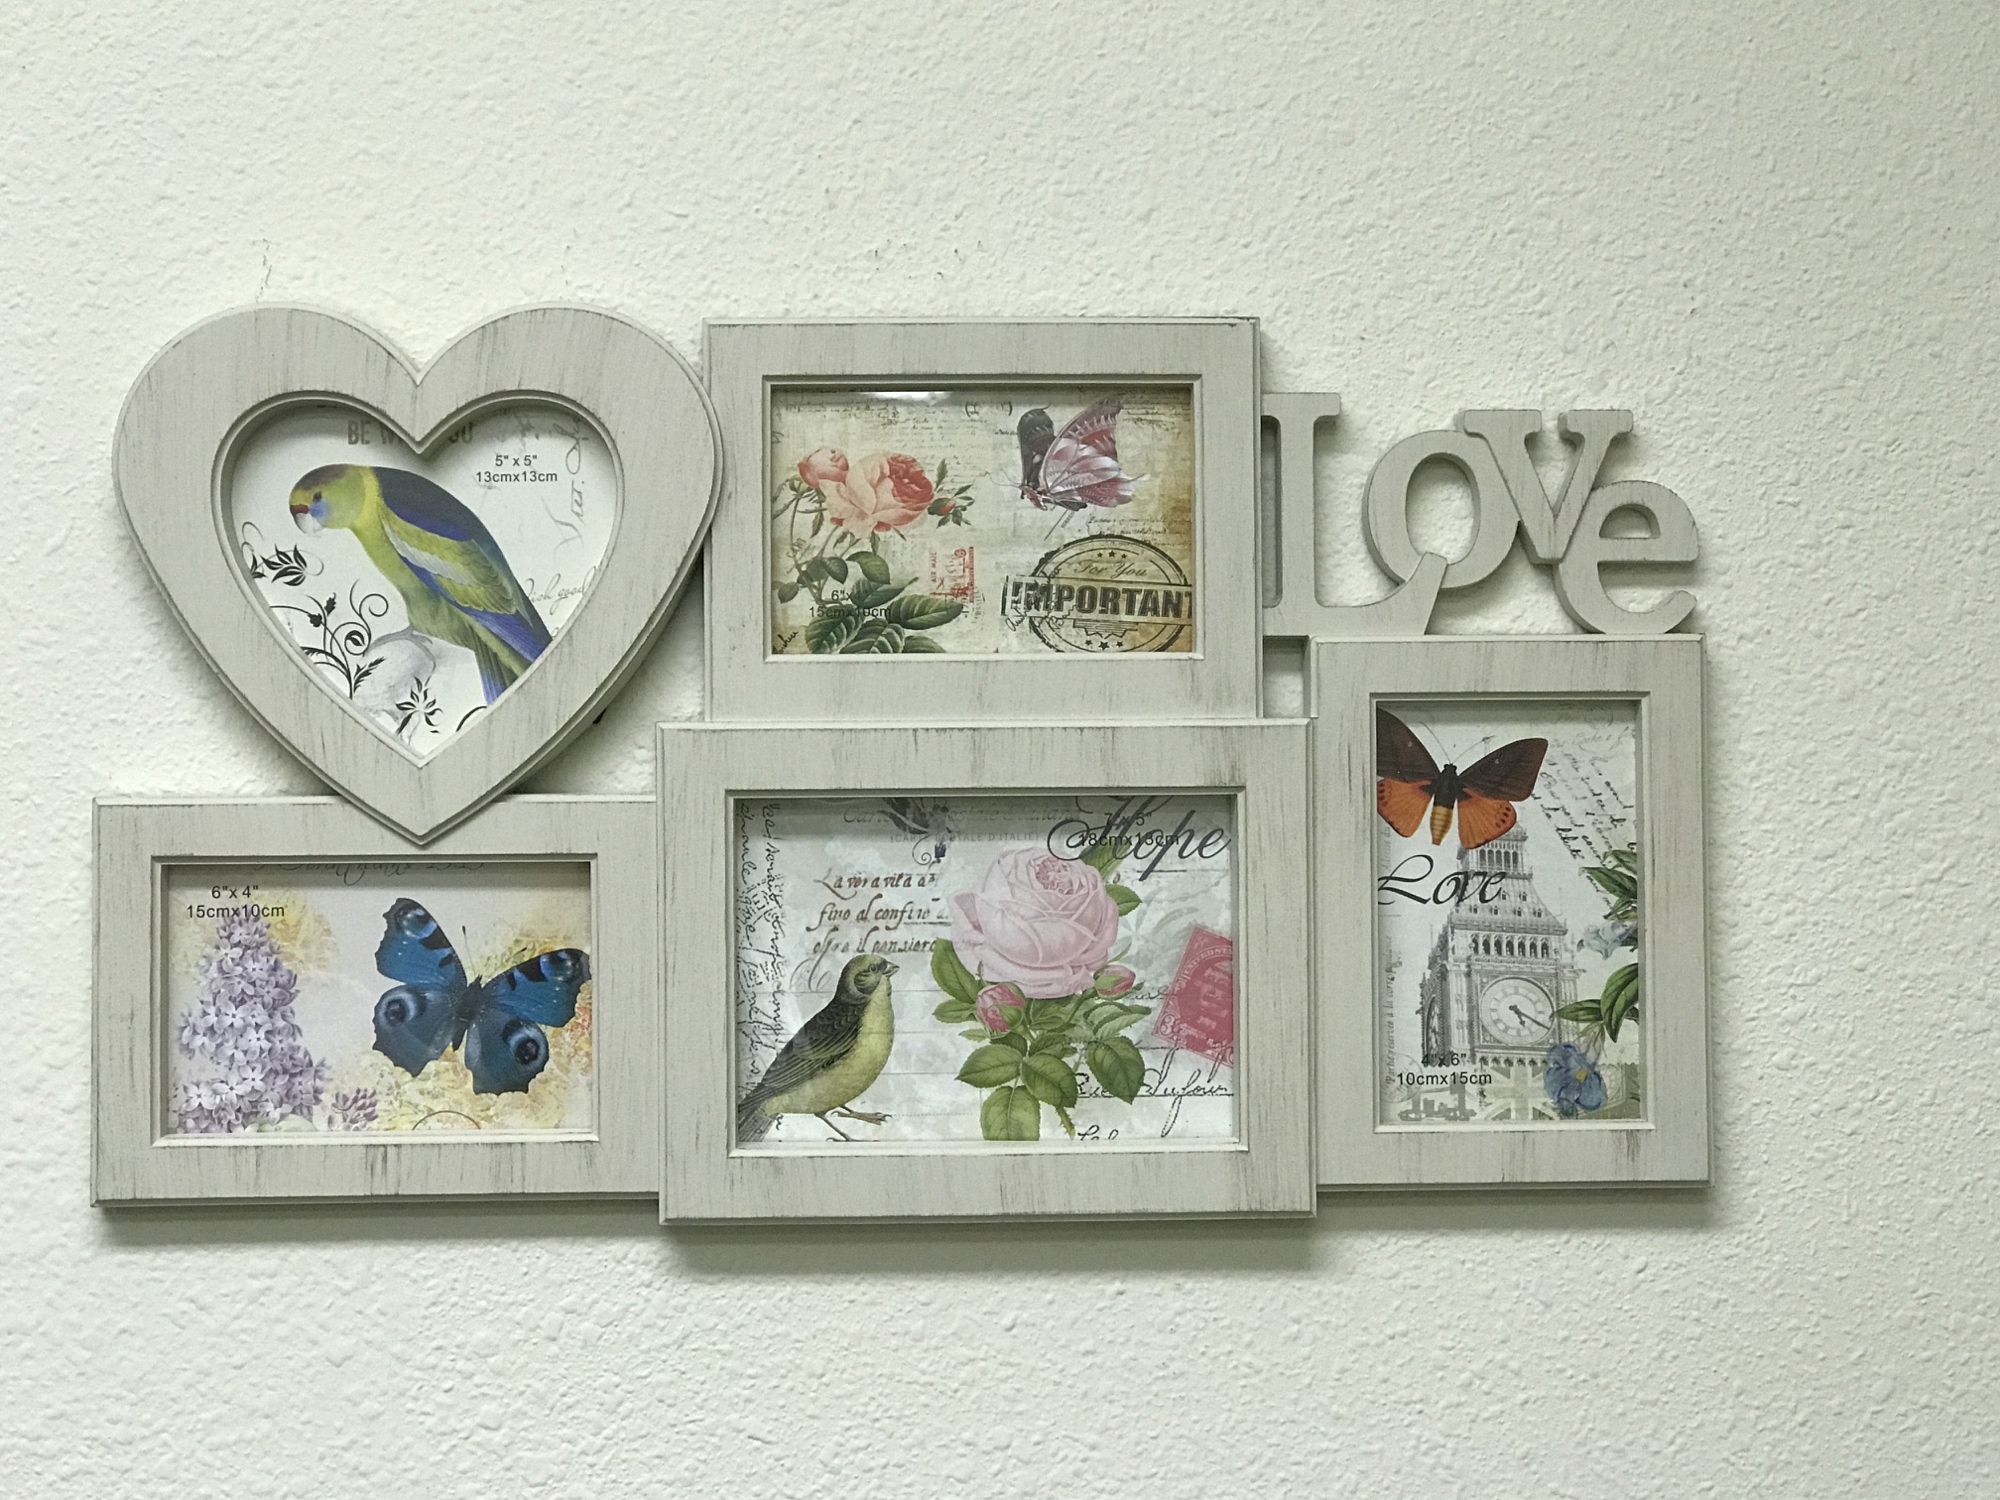 Creative Motion Industries Photo Frames with Love.  Total 5 Photoframes - Heart Frame (5" x 5"), 2 6" x 4", 1 4" x 6", 1 7" x 5")